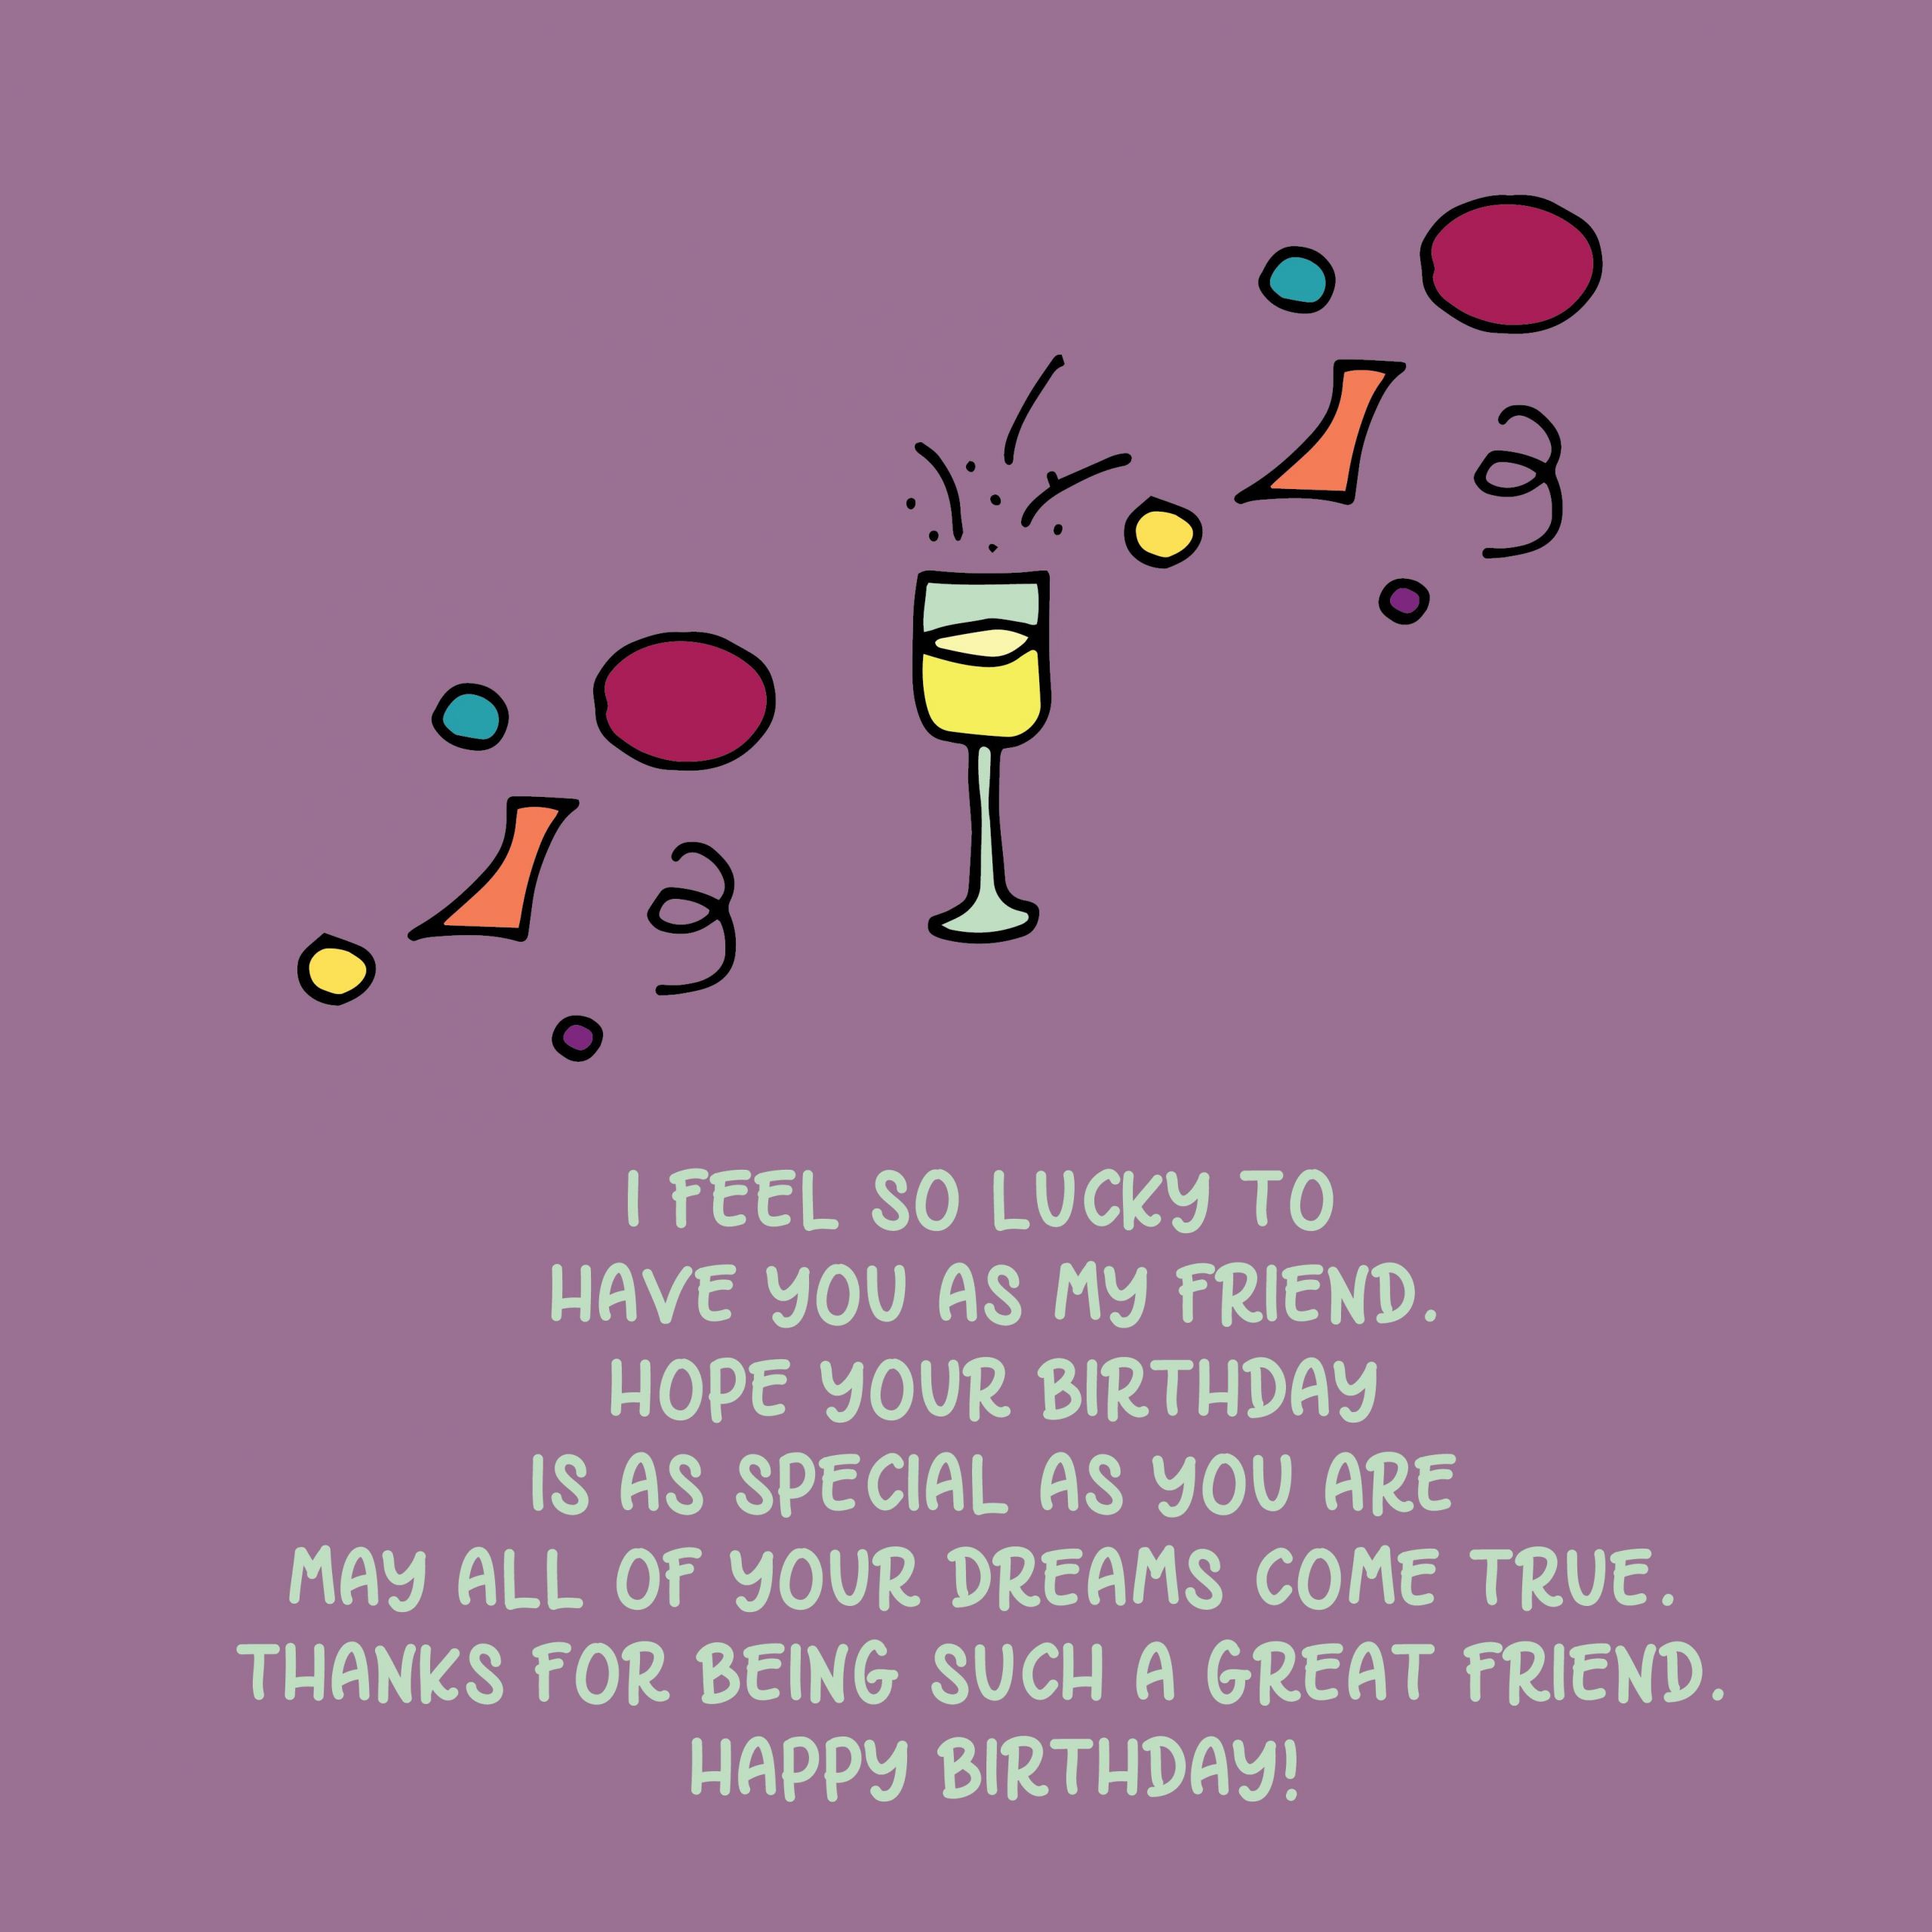 Happy Birthday Quote To A Friend
 Happy Birthday Quotes and Wishes for Friends – Top Happy